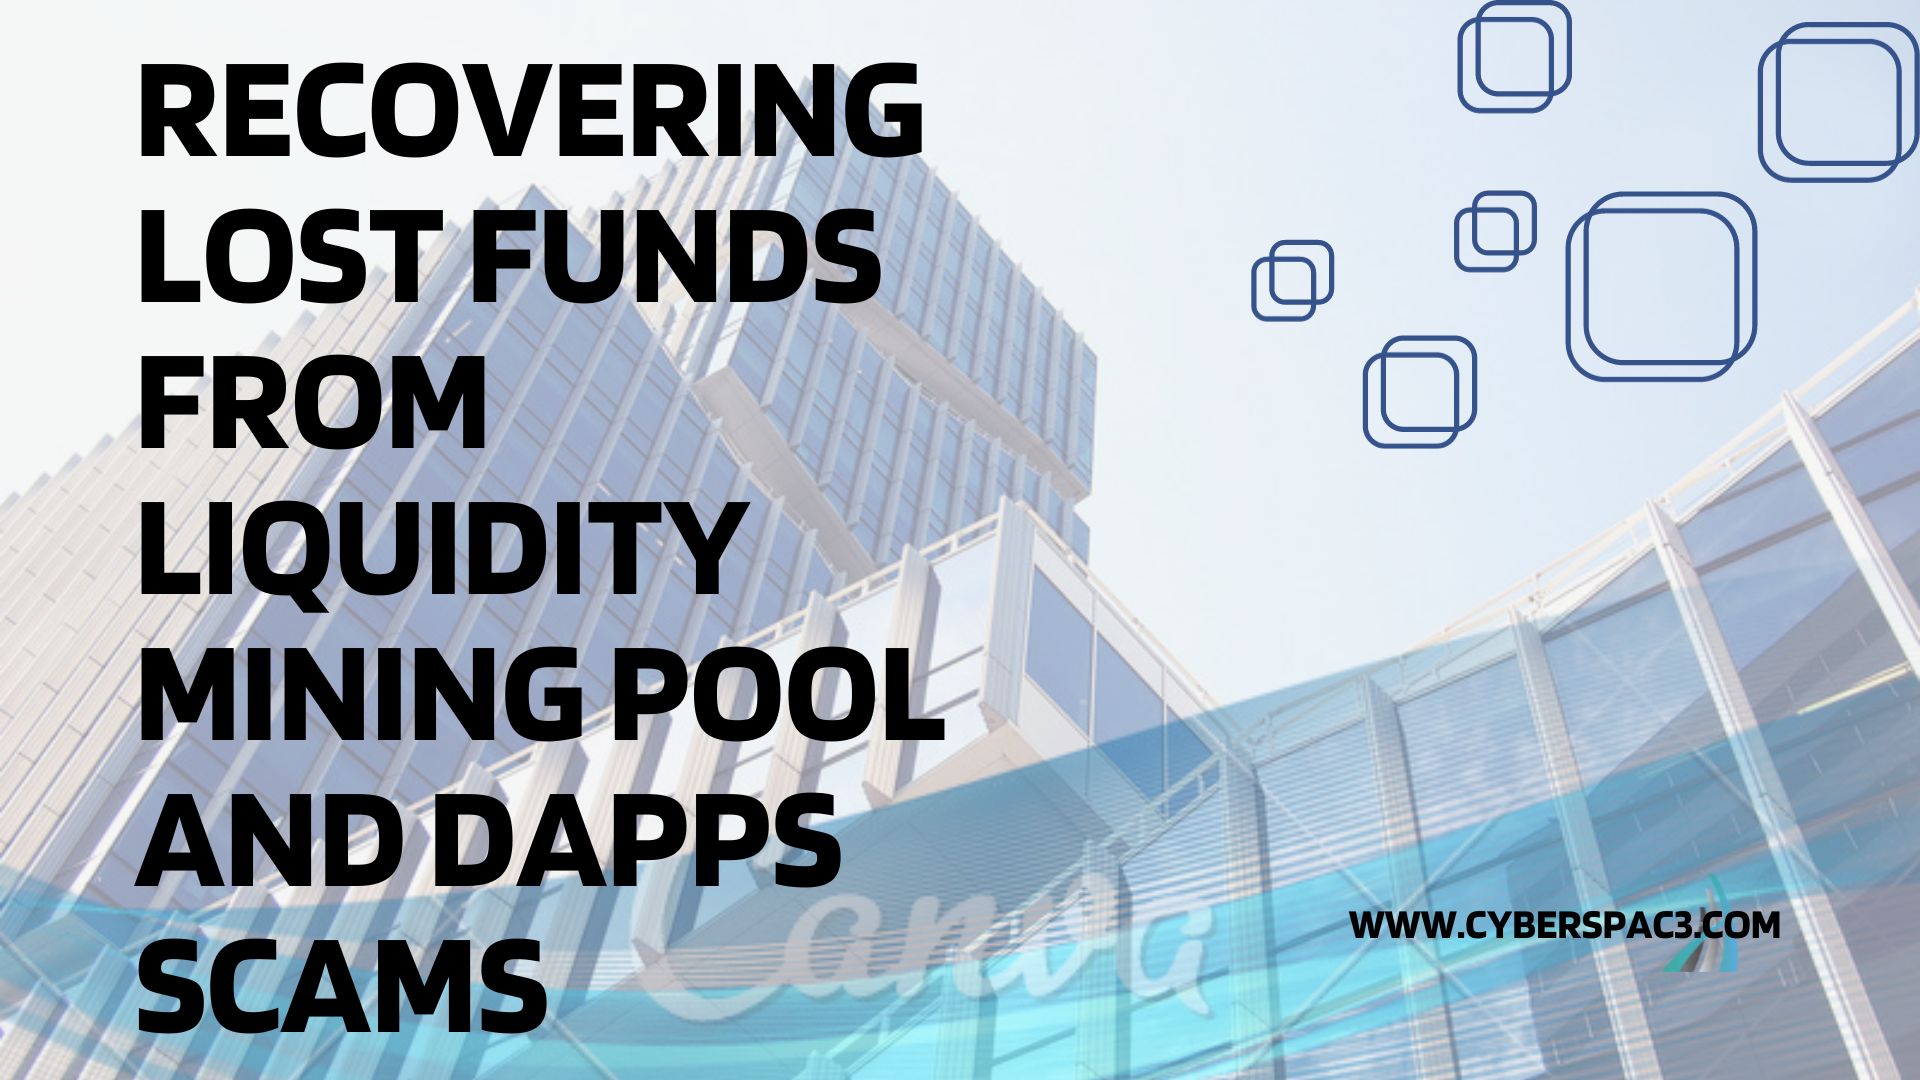 Liquidity Mining Pool and Dapps Scams